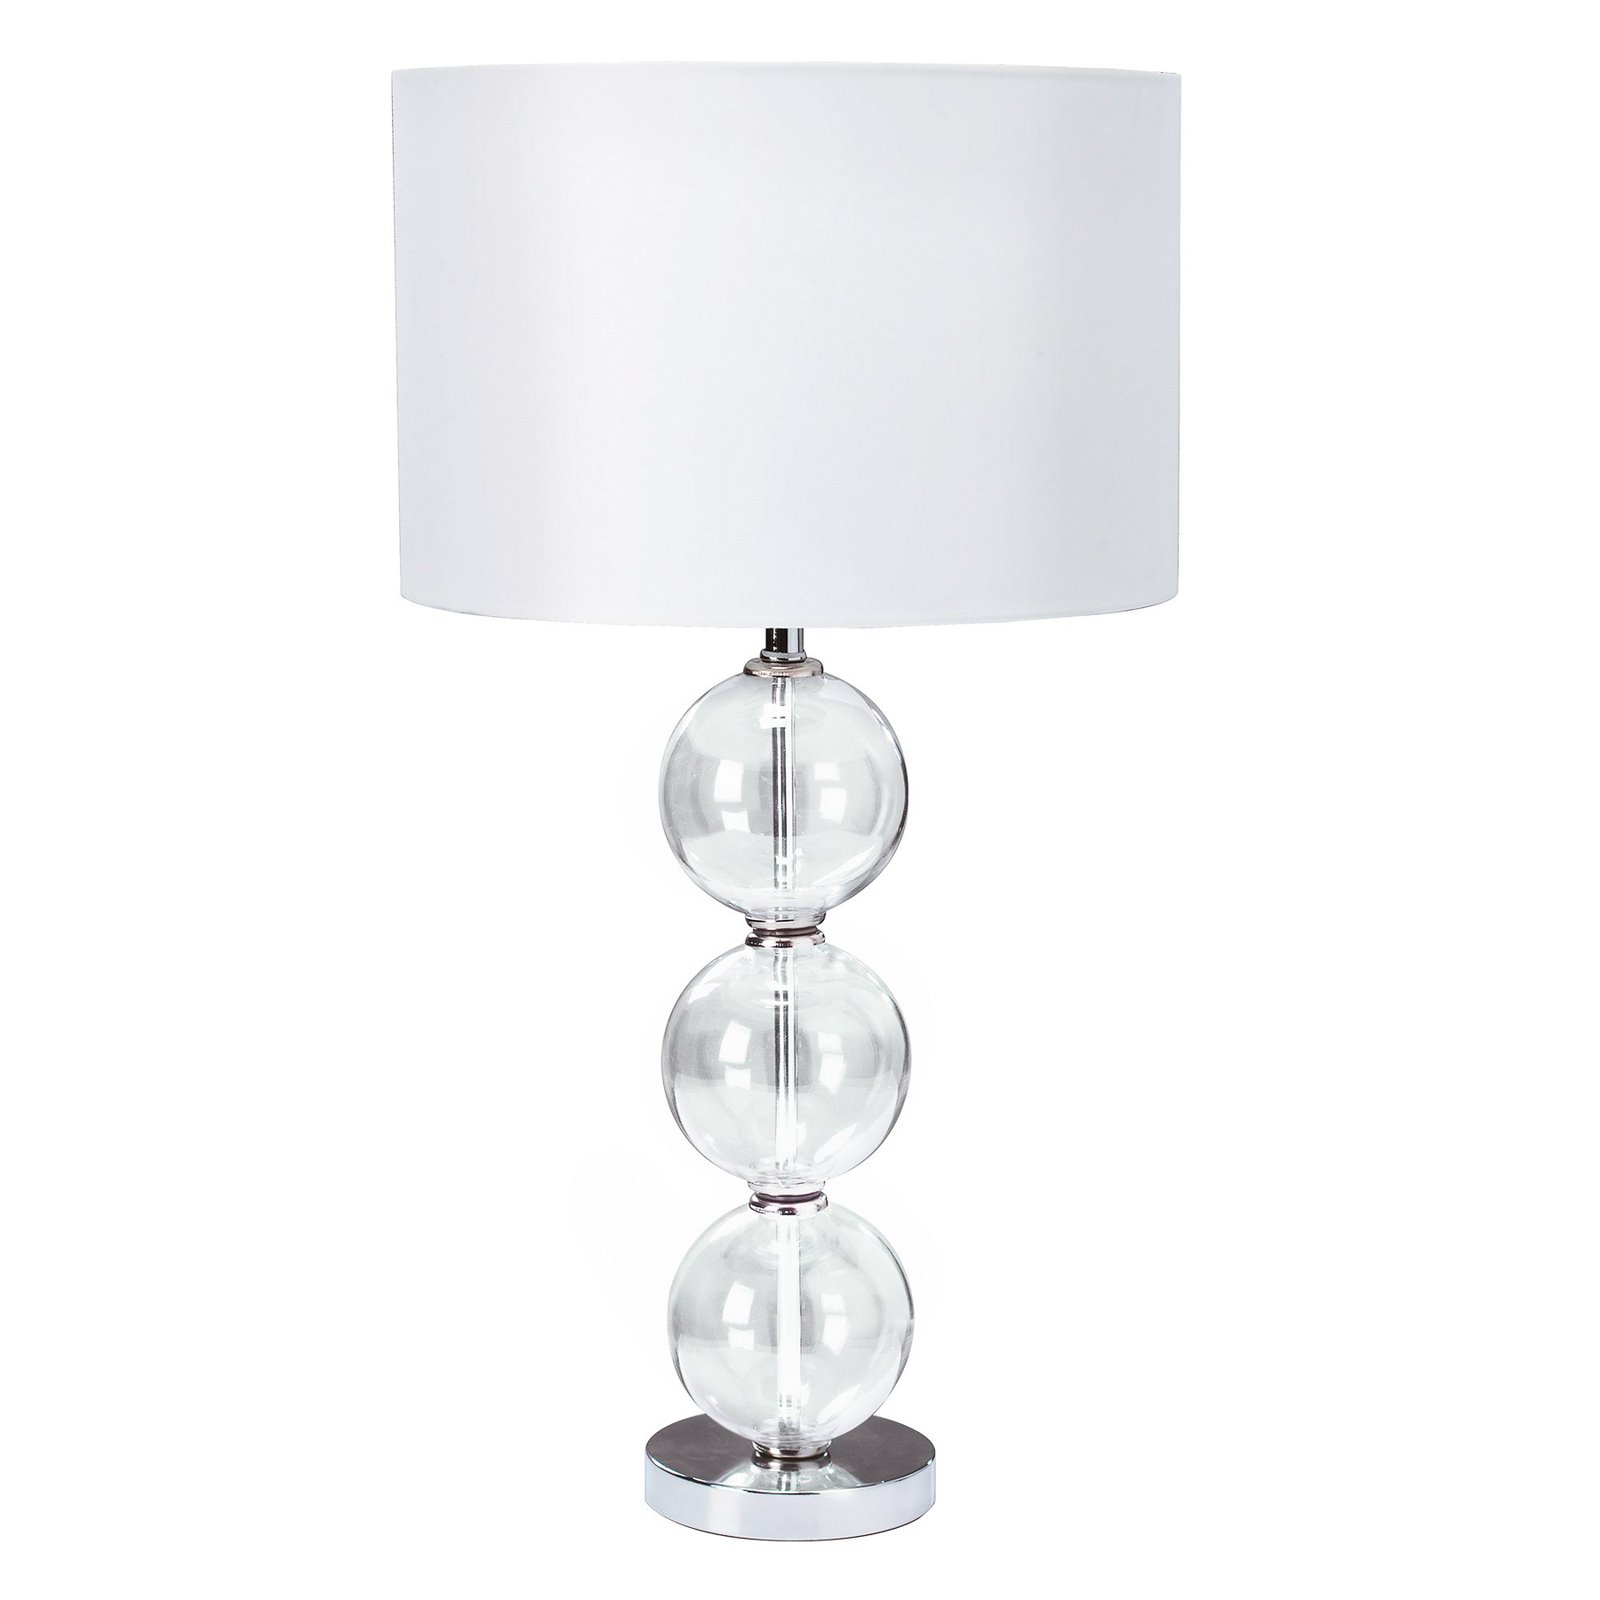 Bliss fabric table lamp, white lampshade